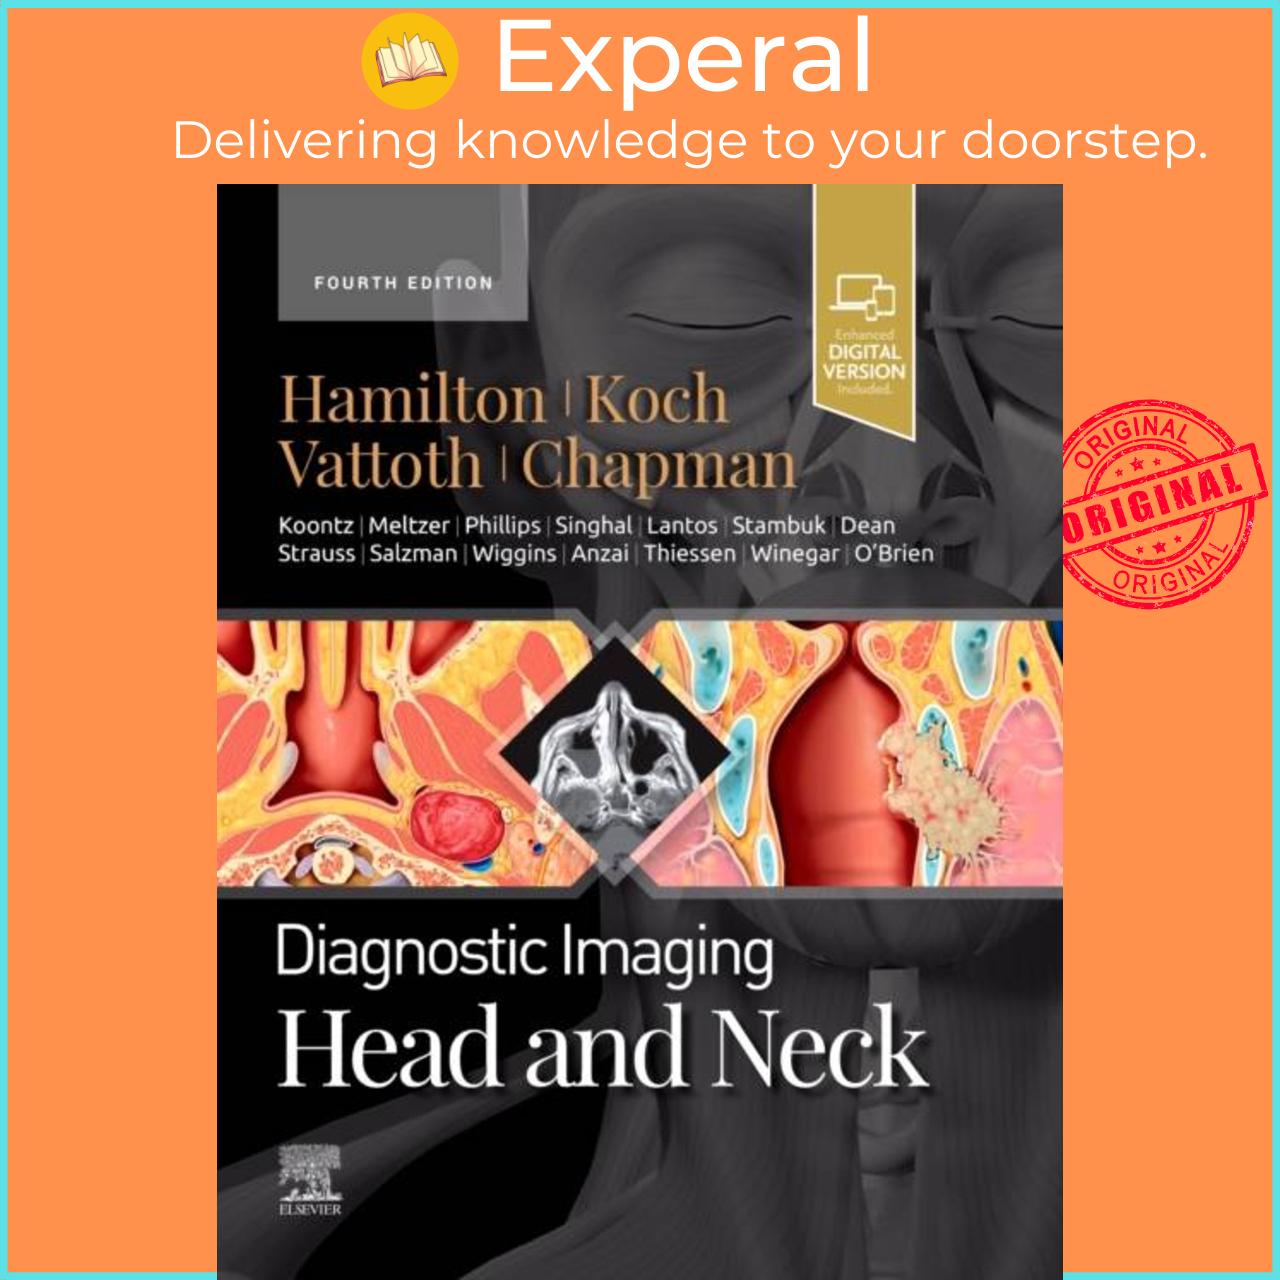 Sách - Diagnostic Imaging: Head and Neck by Philip R. Chapman (UK edition, hardcover)